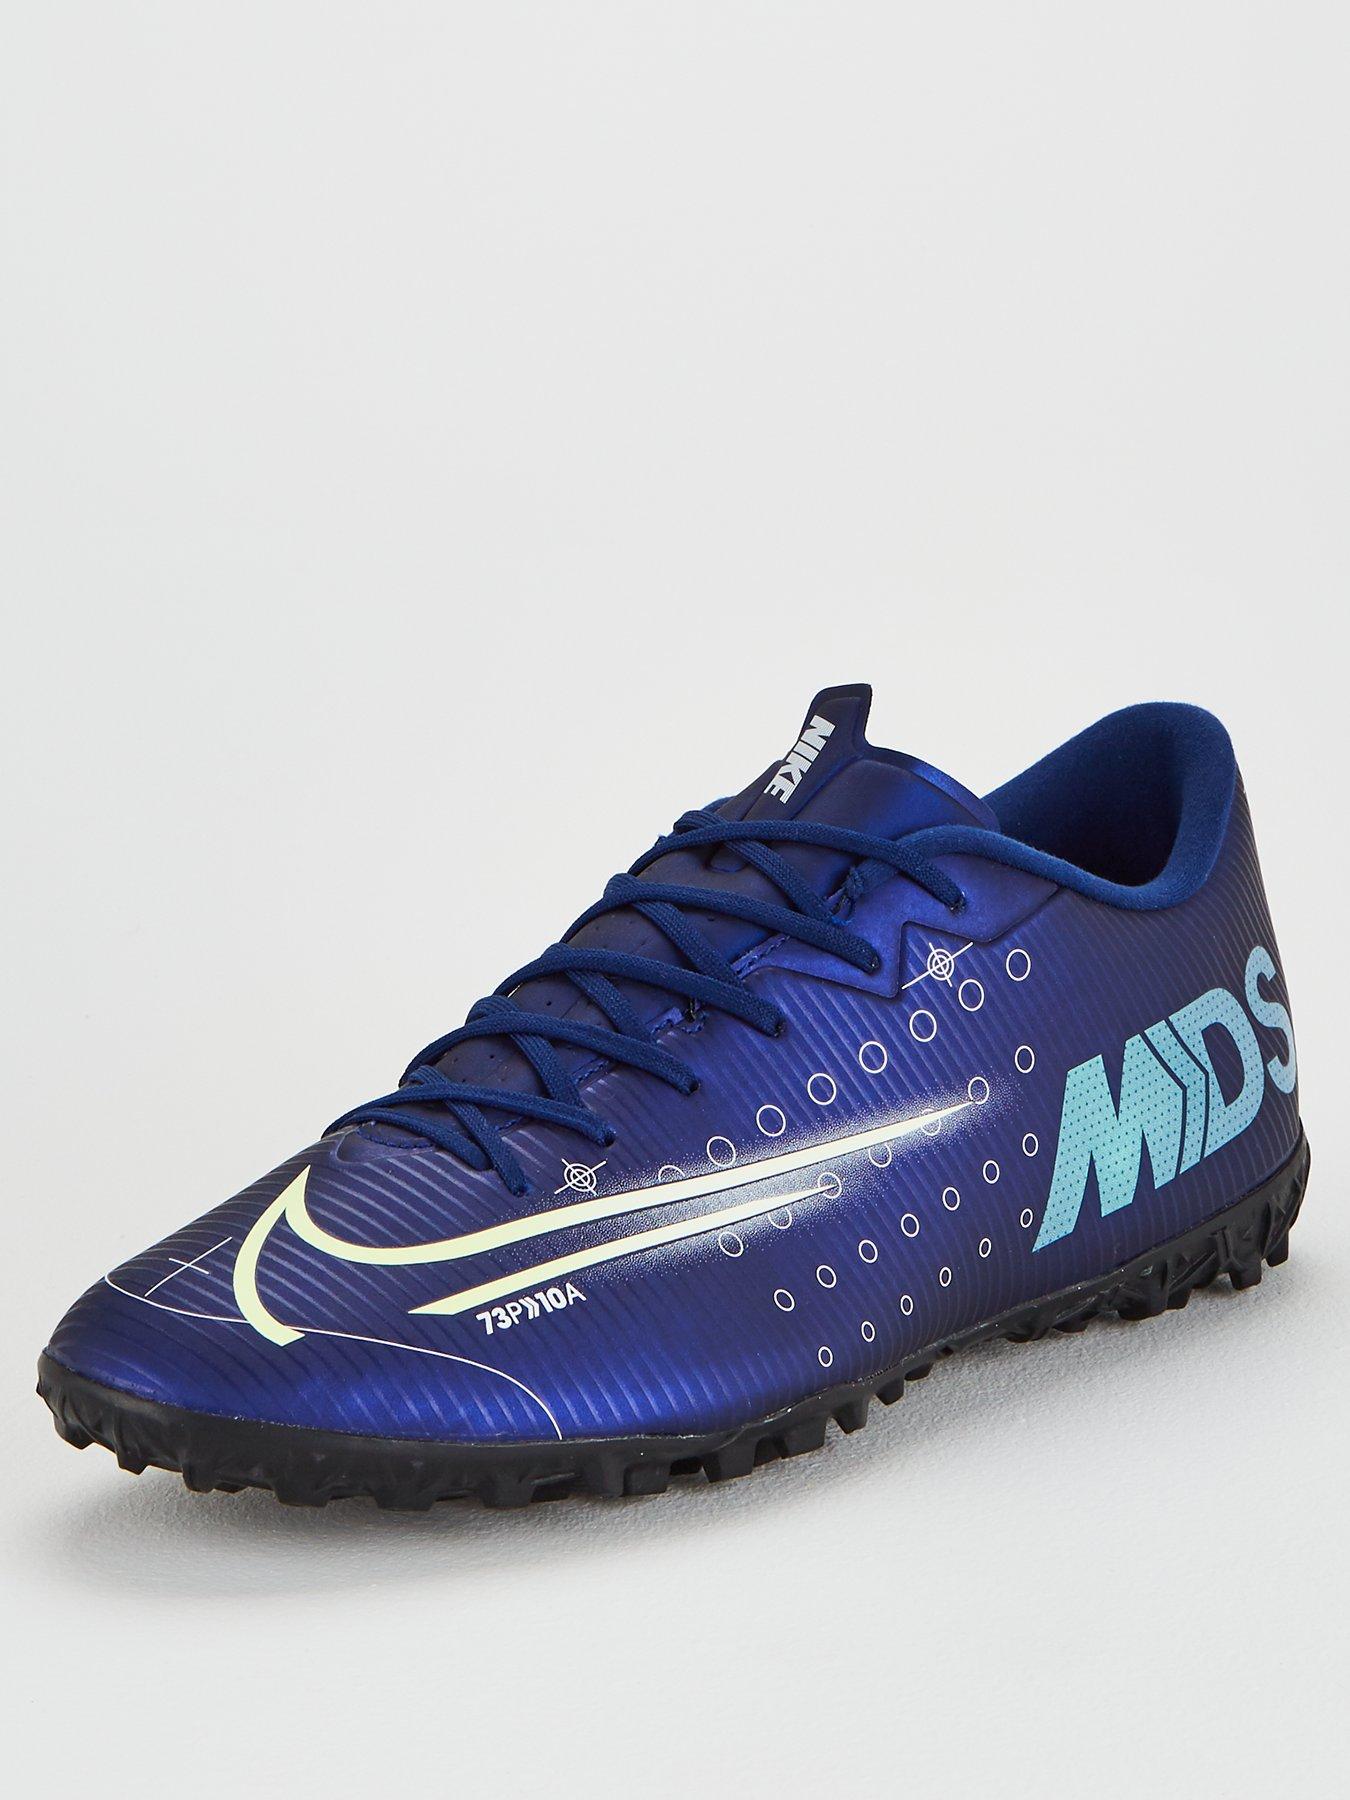 nike mercurial football boots astro